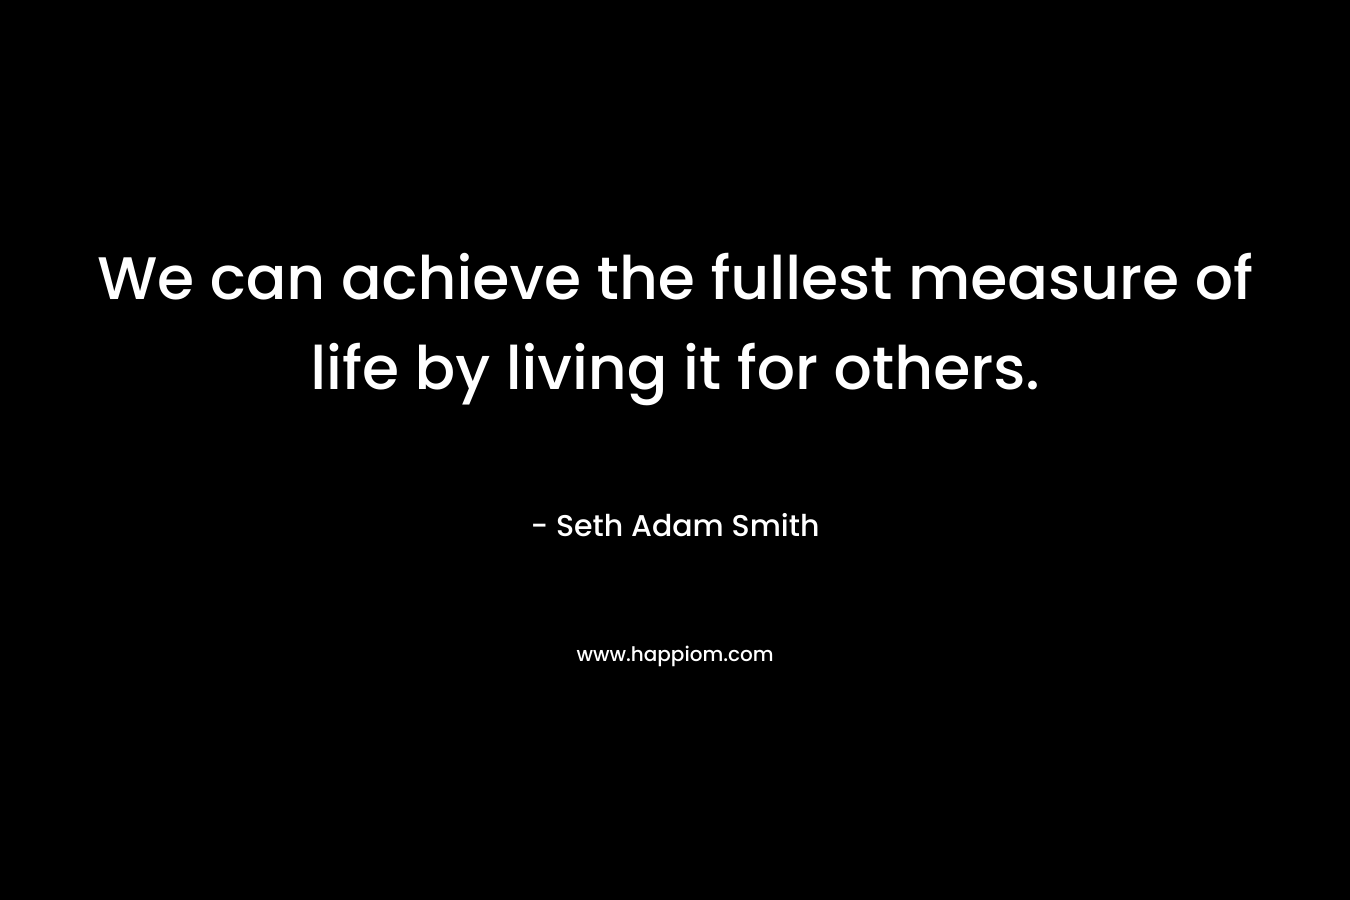 We can achieve the fullest measure of life by living it for others. – Seth Adam Smith